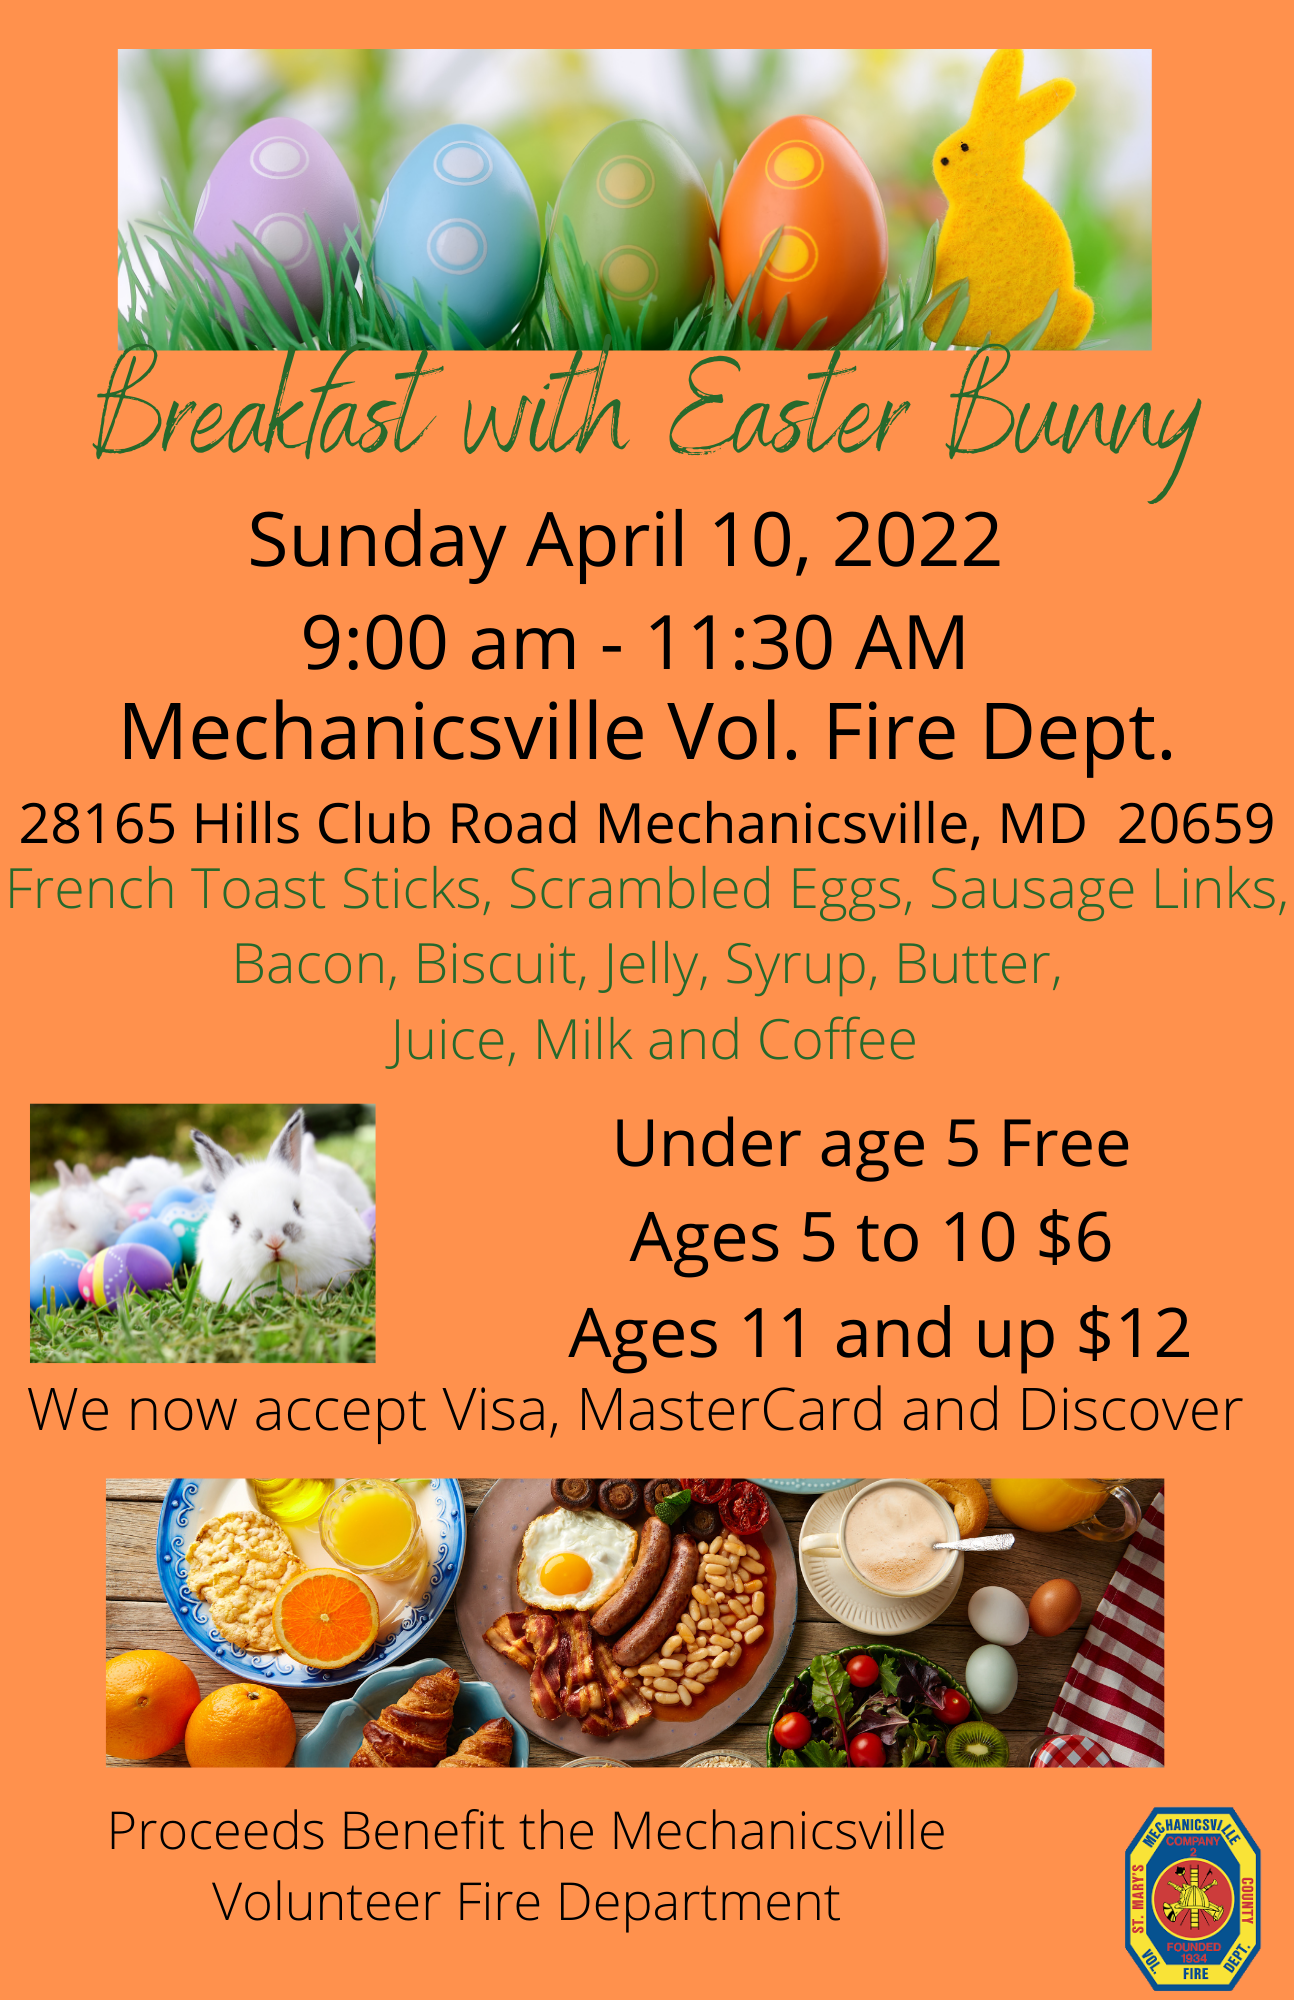 Breakfast with the Easter Bunny Mechanicsville VFD